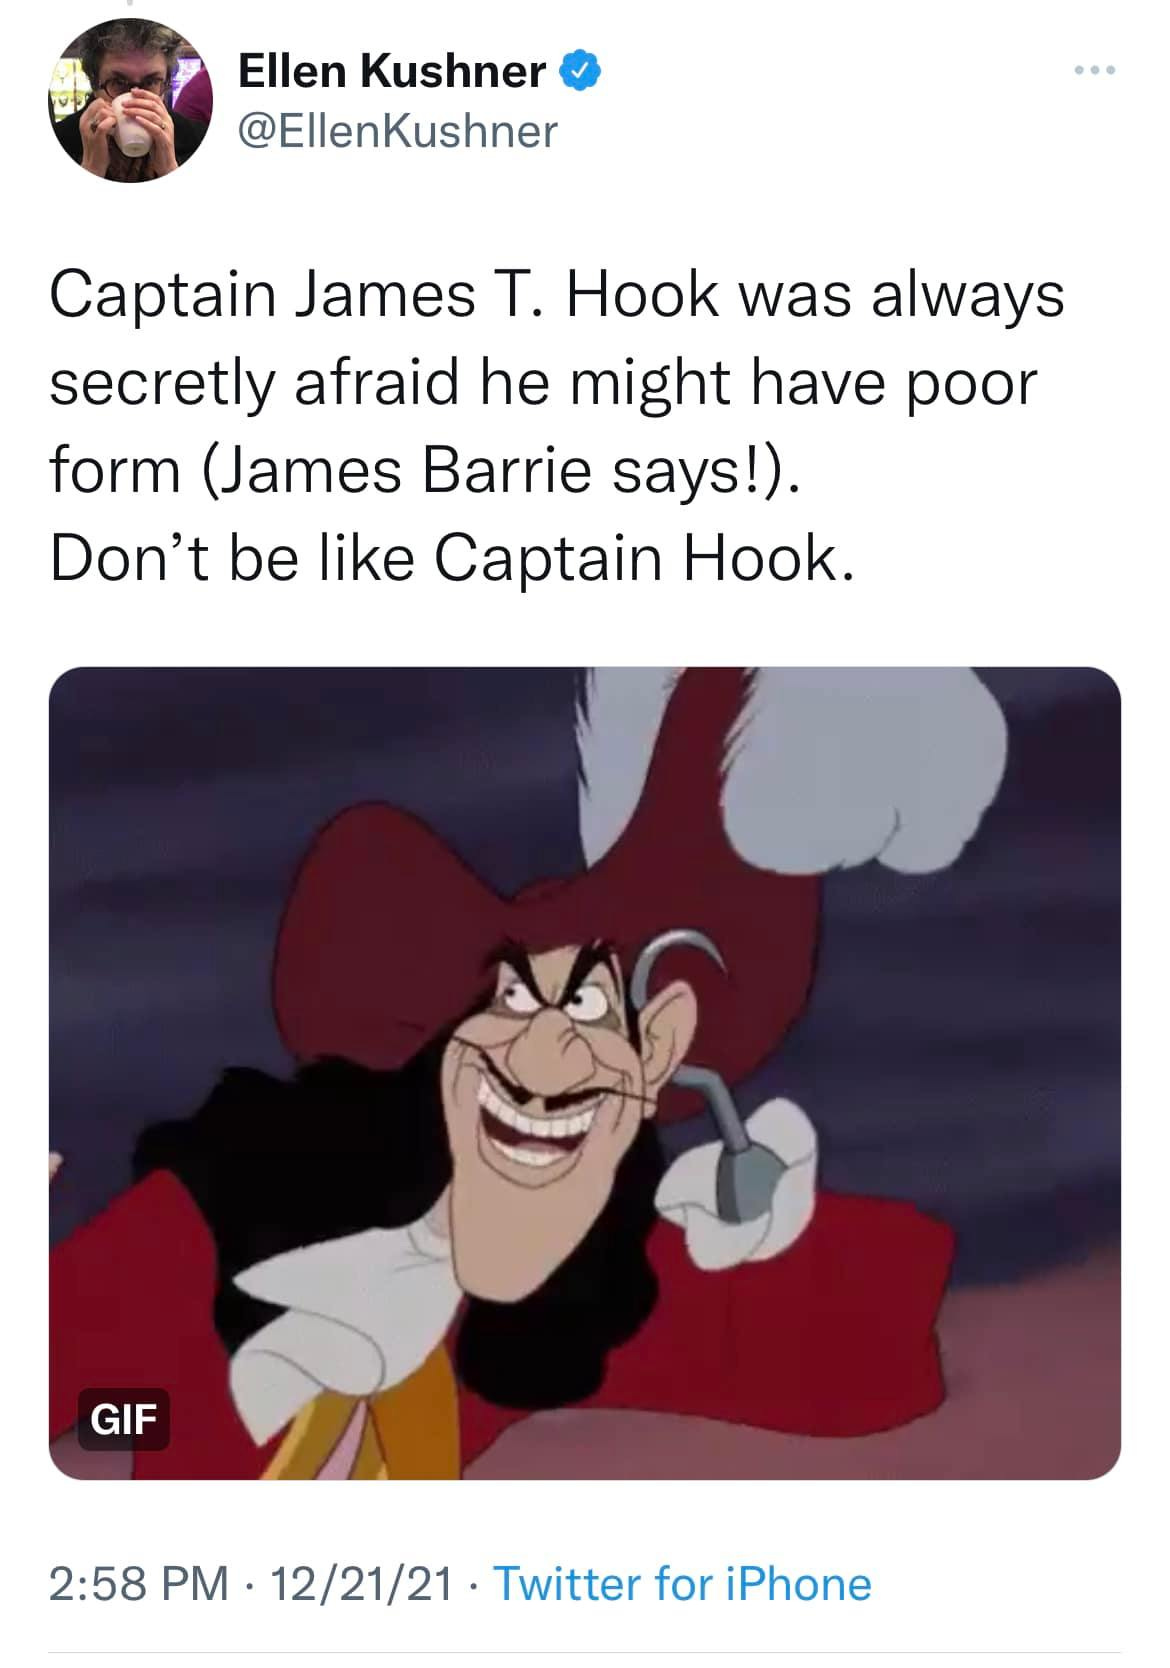 May be a meme of 1 person and text that says 'Ellen Kushner @EllenKushner Captain ame T. Hook was always secretly afraid he might have poor form (James Barrie says!). Don't be like Captain Hook. GIF 2:58 PM. 12/21/21 Twitter for iPhone'